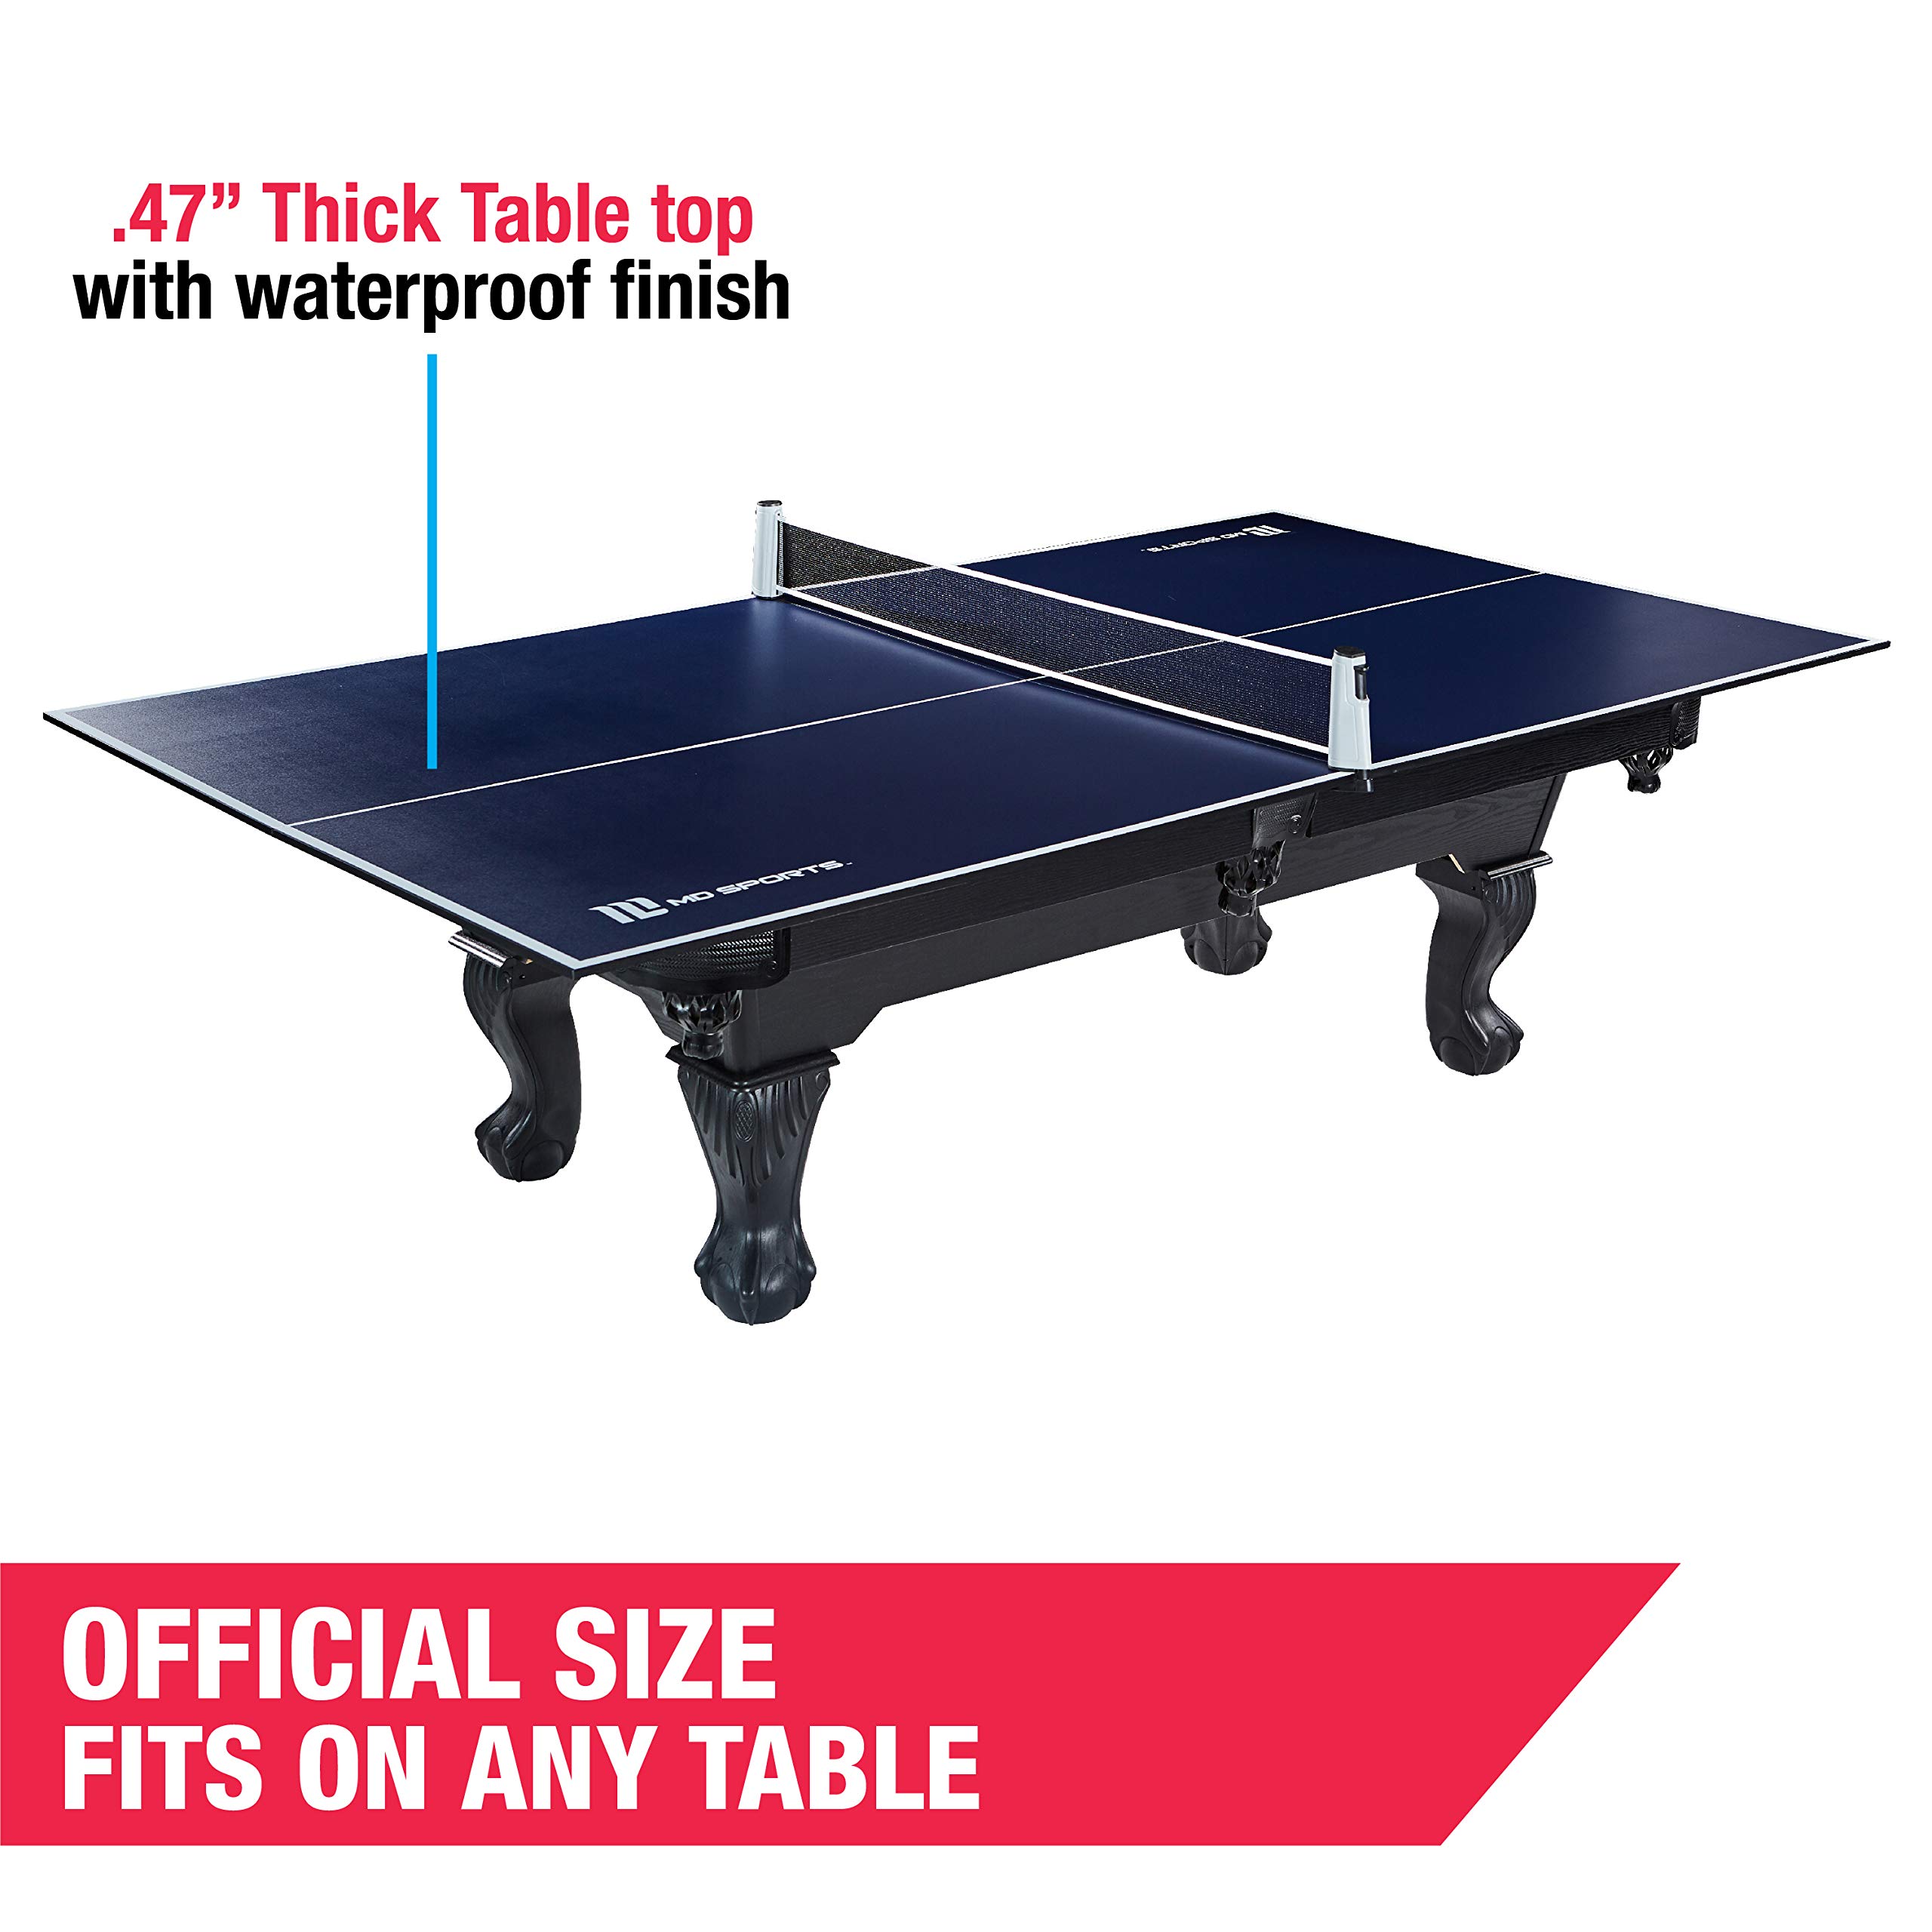 MD Sports Table Tennis Tables Multiple Styles, Foldable for Easy Storage with Nets Included, Perfect for Family Game Rooms